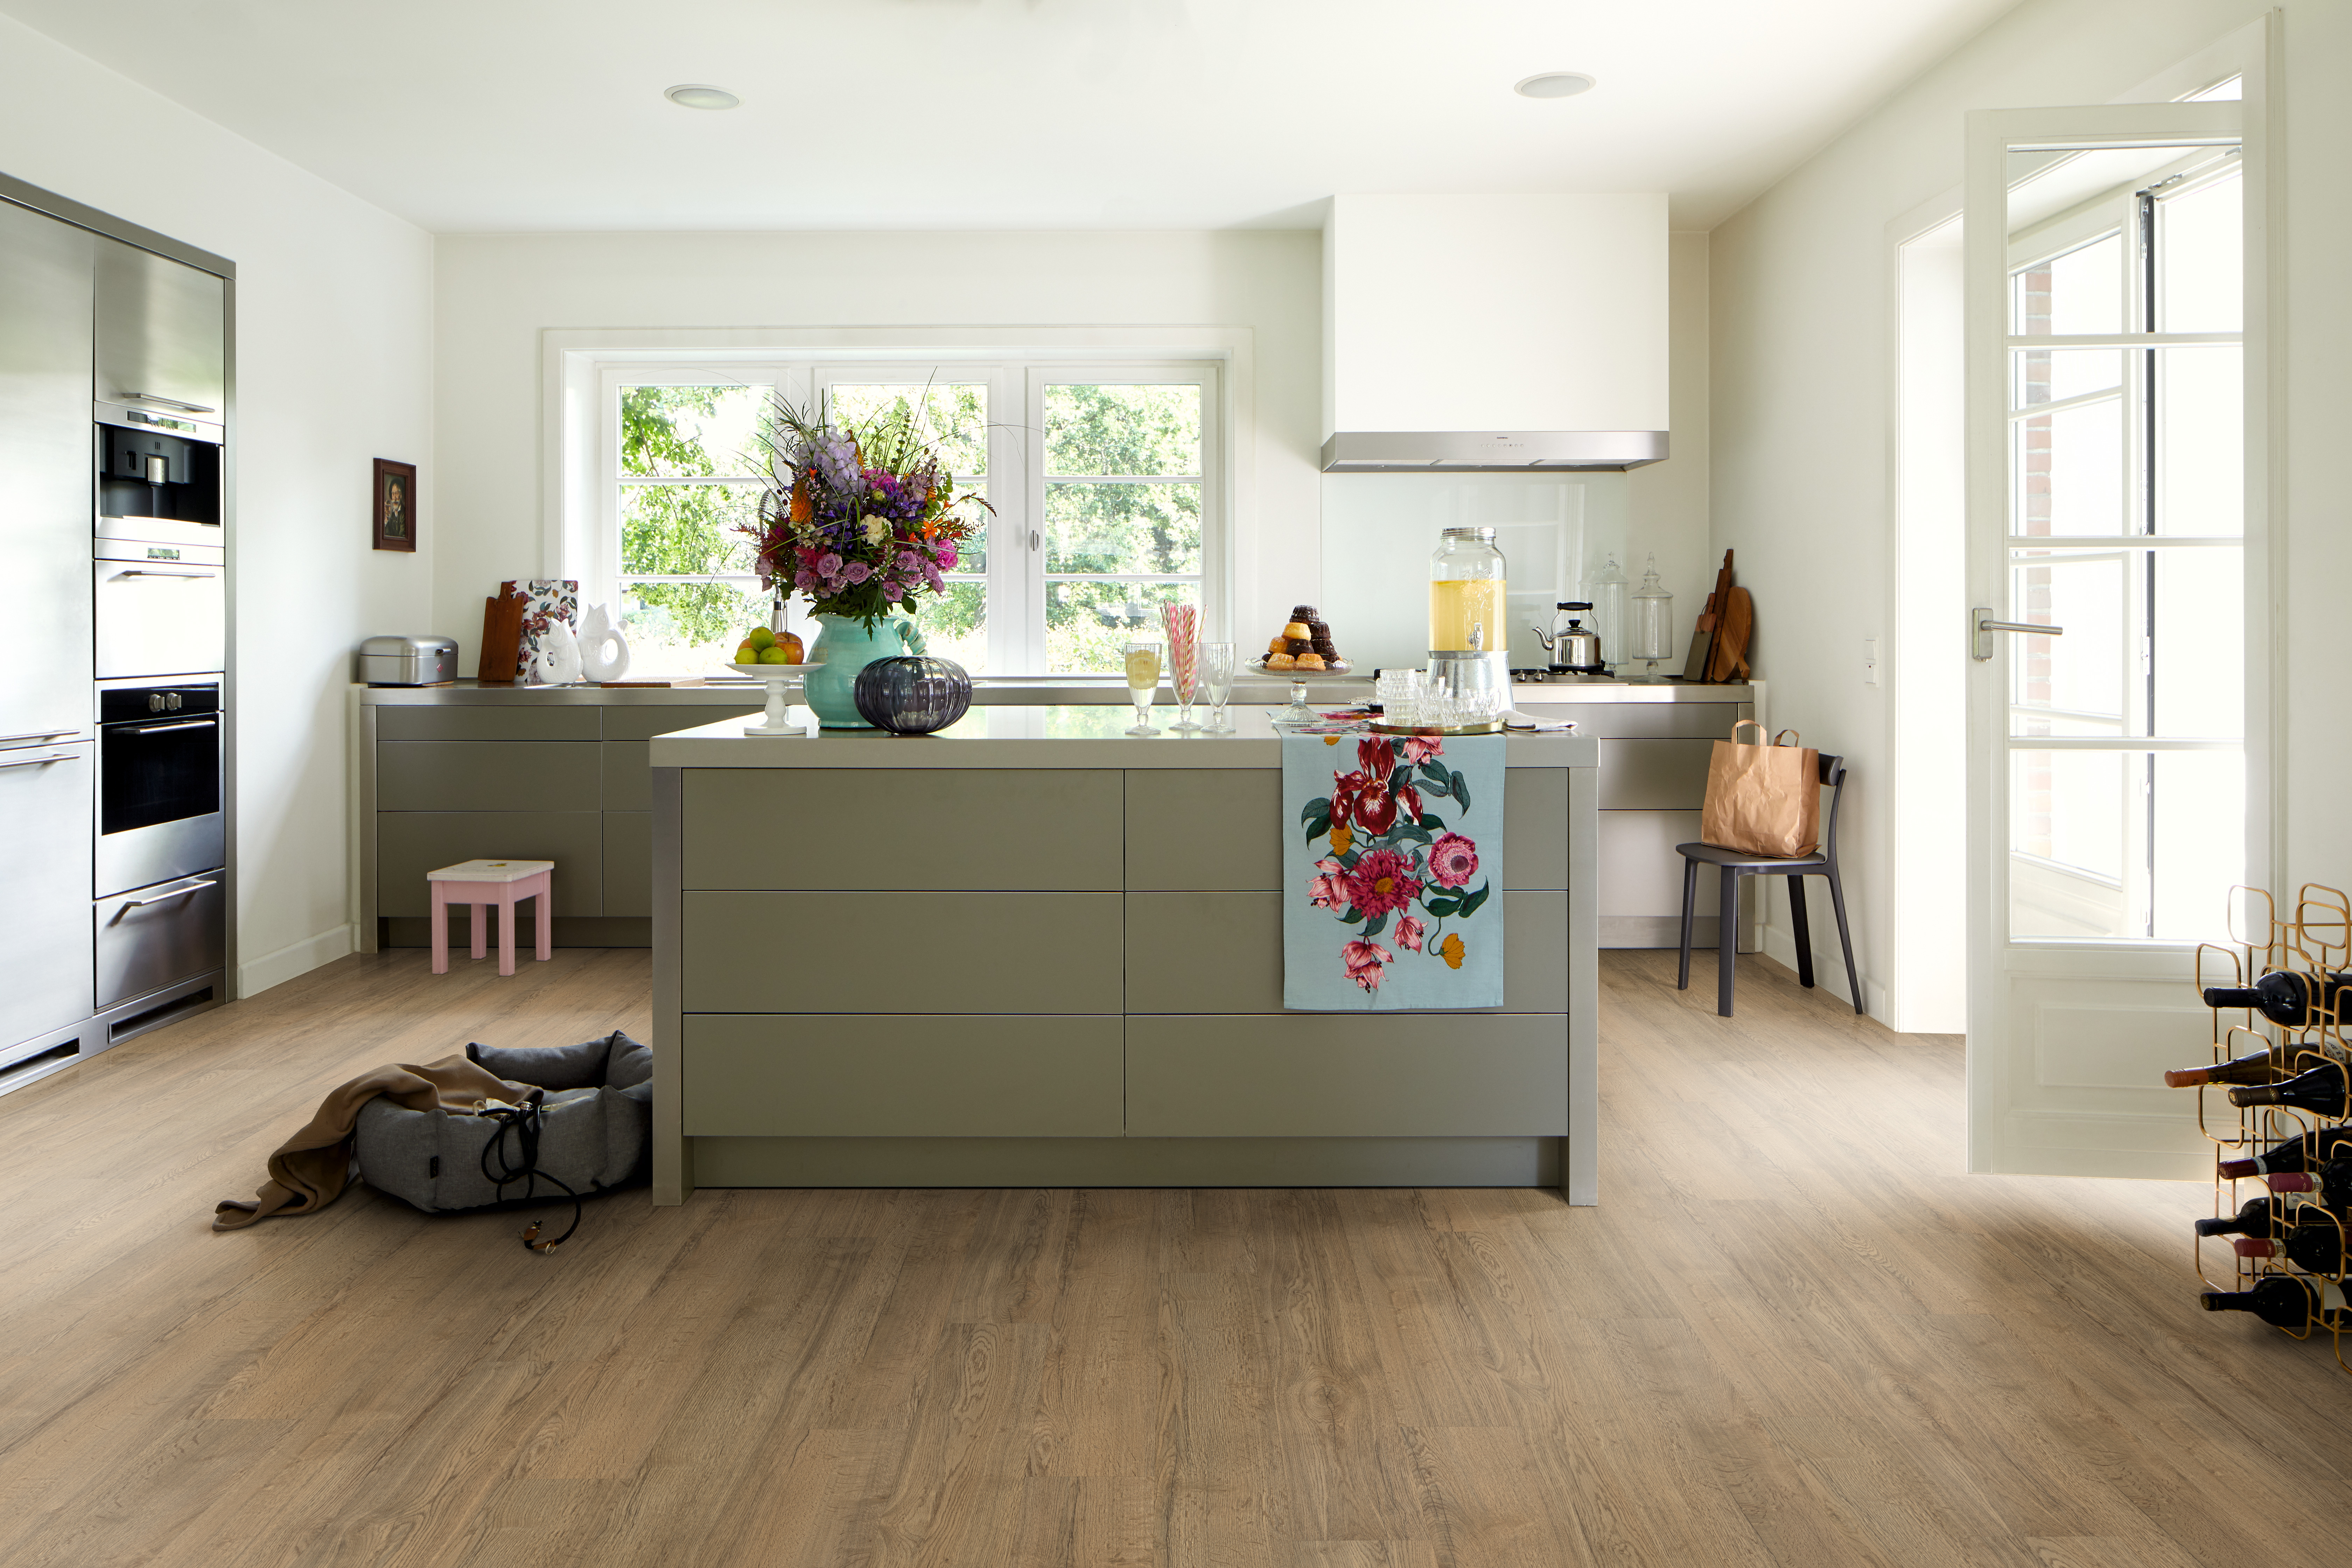 Opt for our natural design flooring without PVC